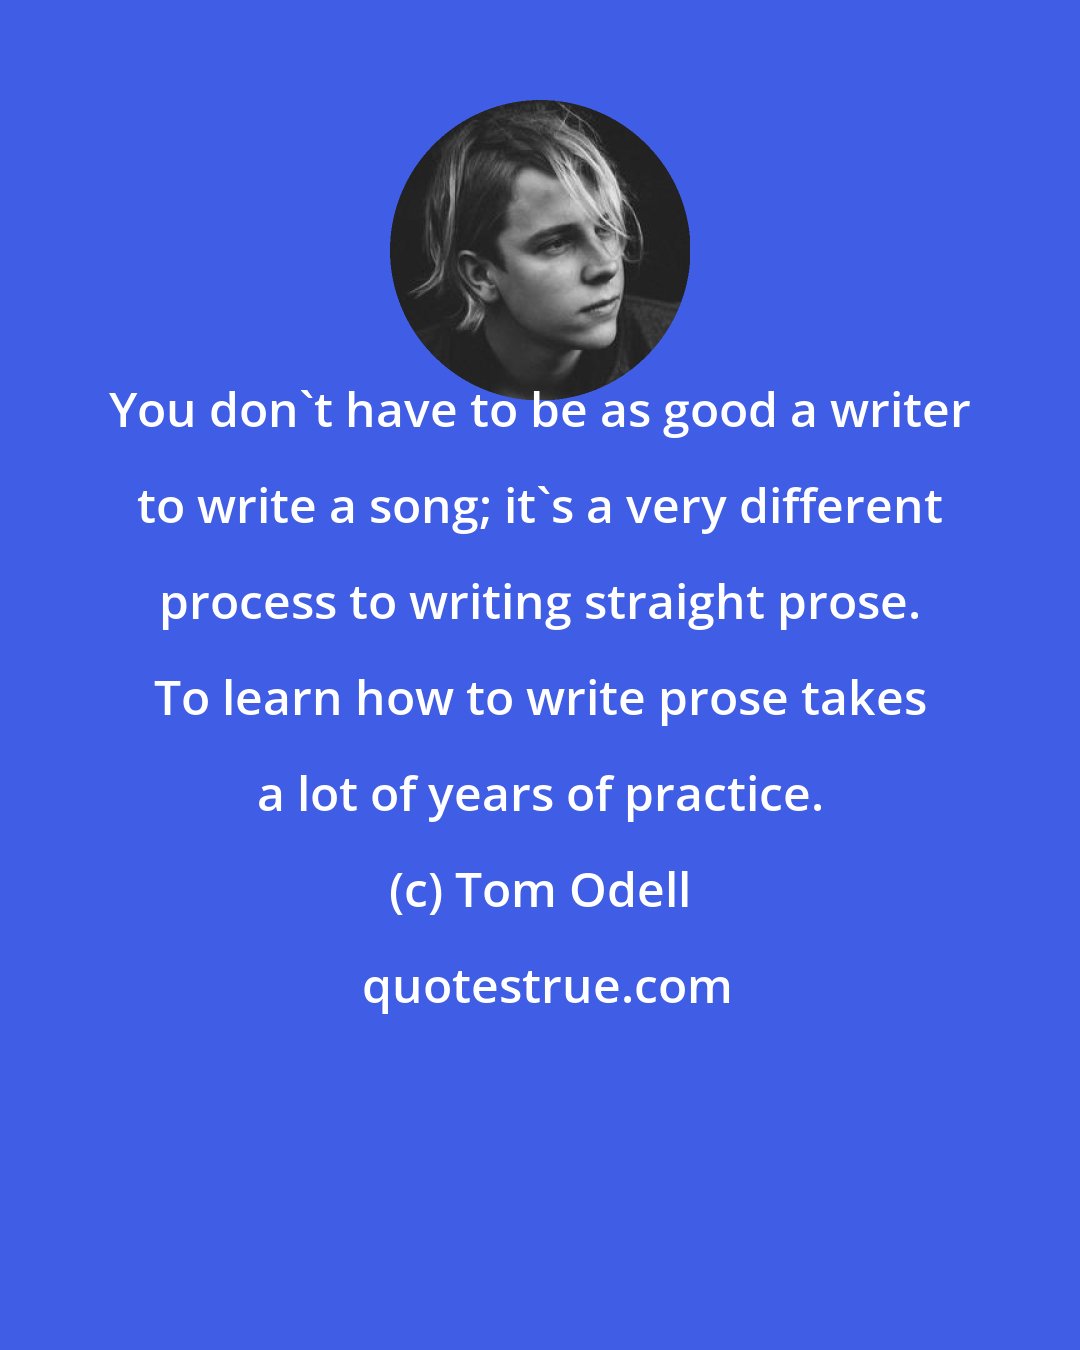 Tom Odell: You don't have to be as good a writer to write a song; it's a very different process to writing straight prose. To learn how to write prose takes a lot of years of practice.